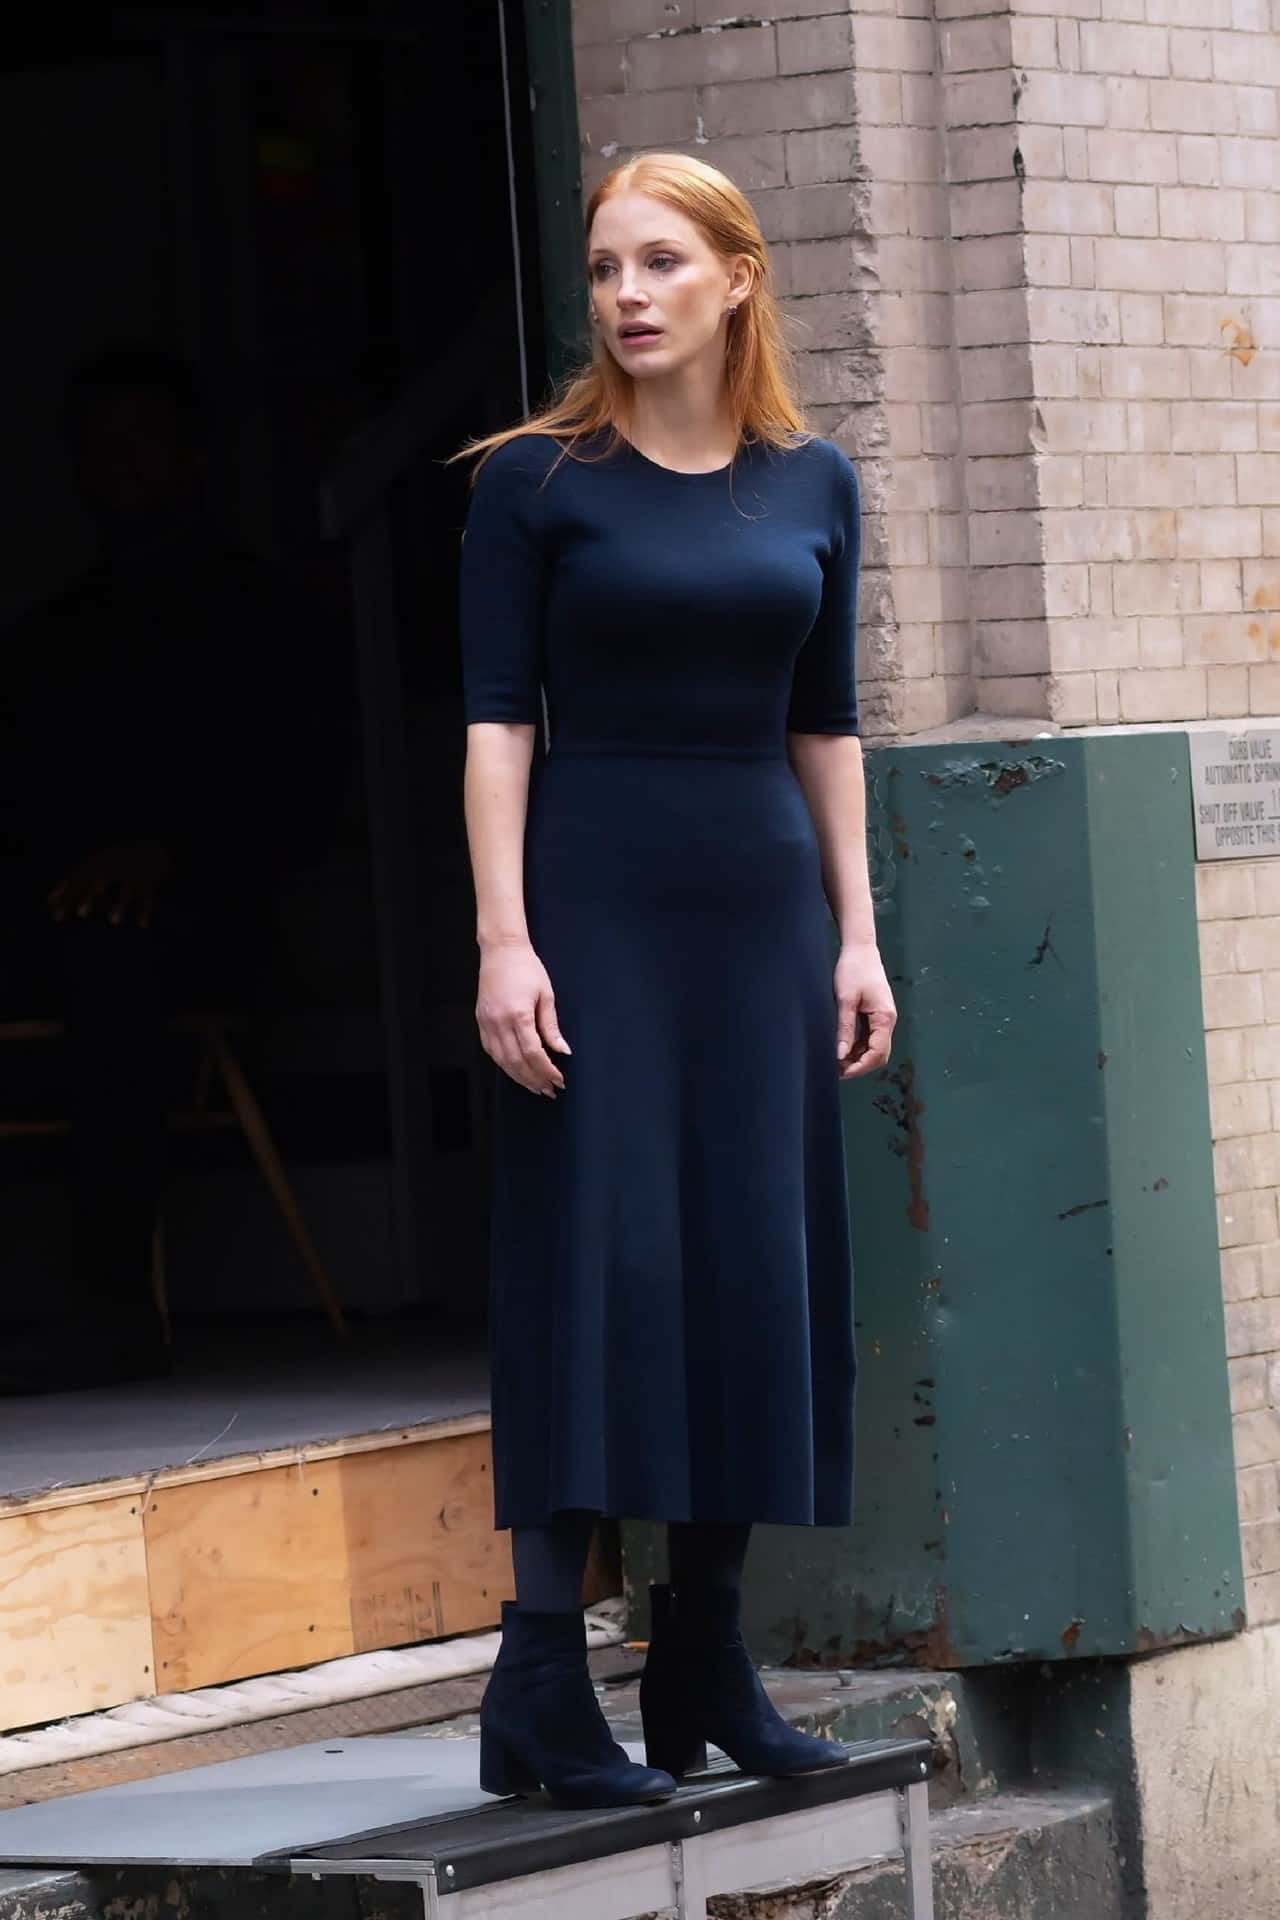 Jessica Chastain Shines in Character as She Steps Out of the Theater